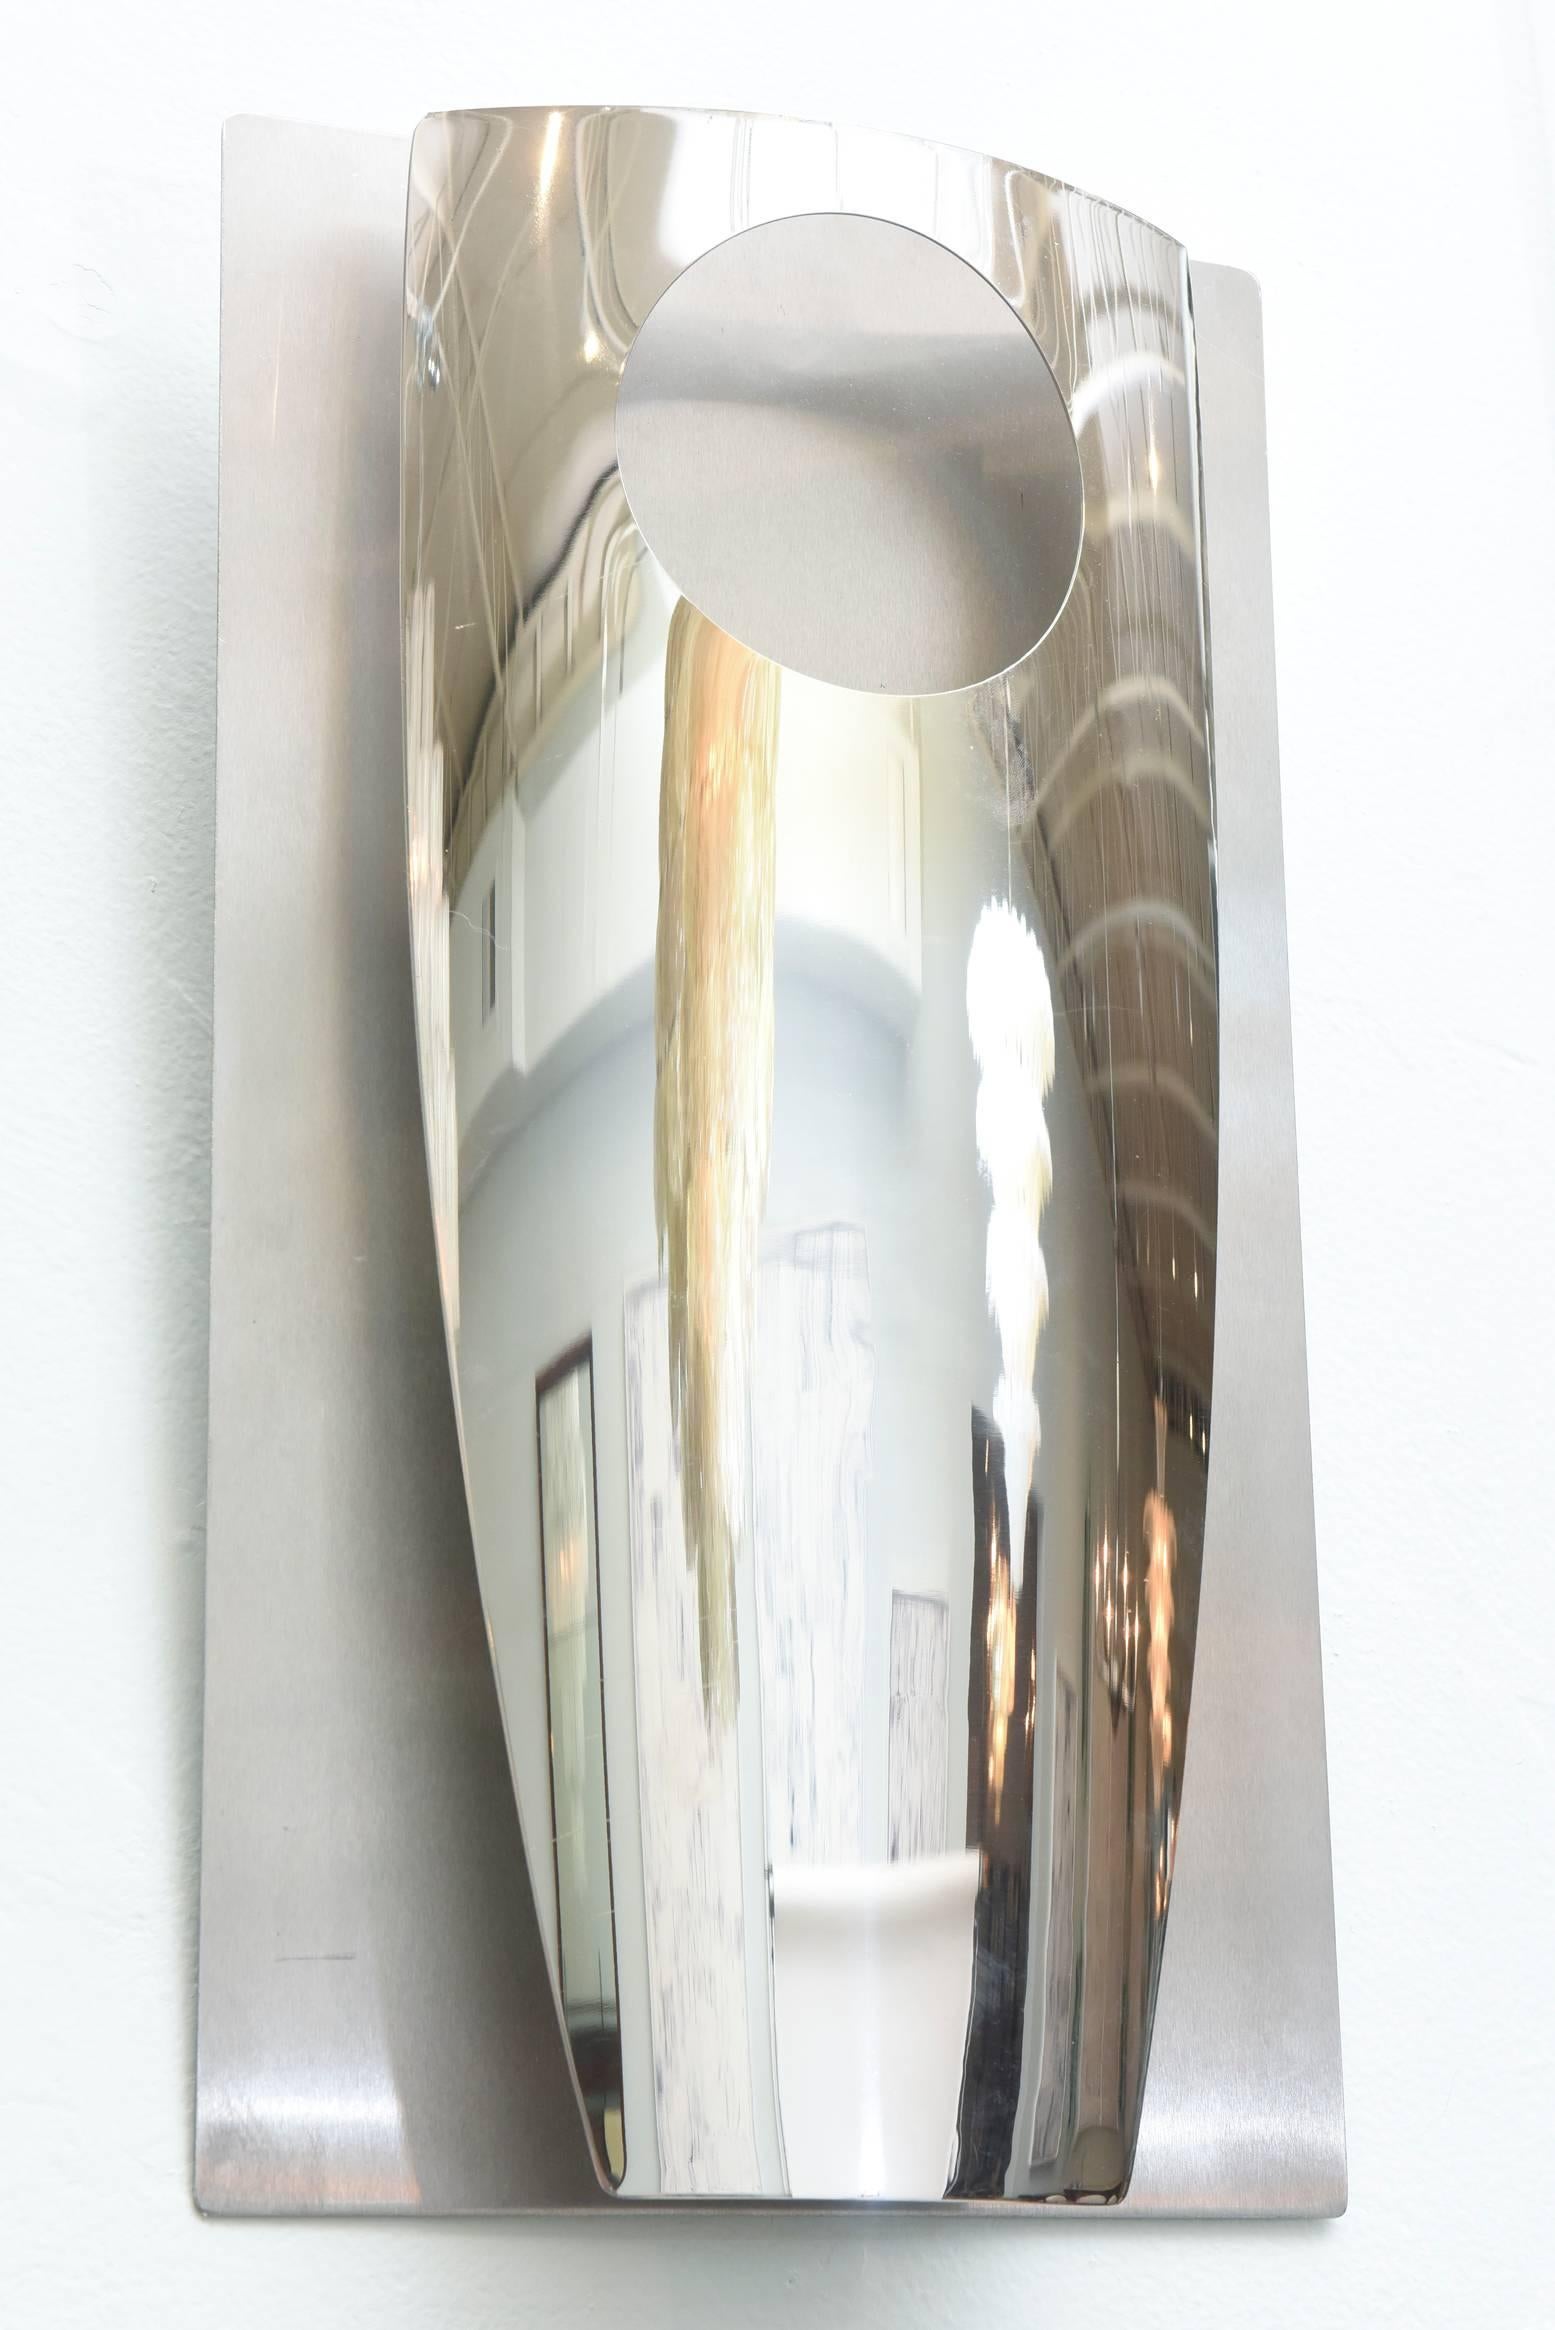 Pair of Italian Modern Polished Chrome and Stainless Steel Wall Lights, Reggiani For Sale 3